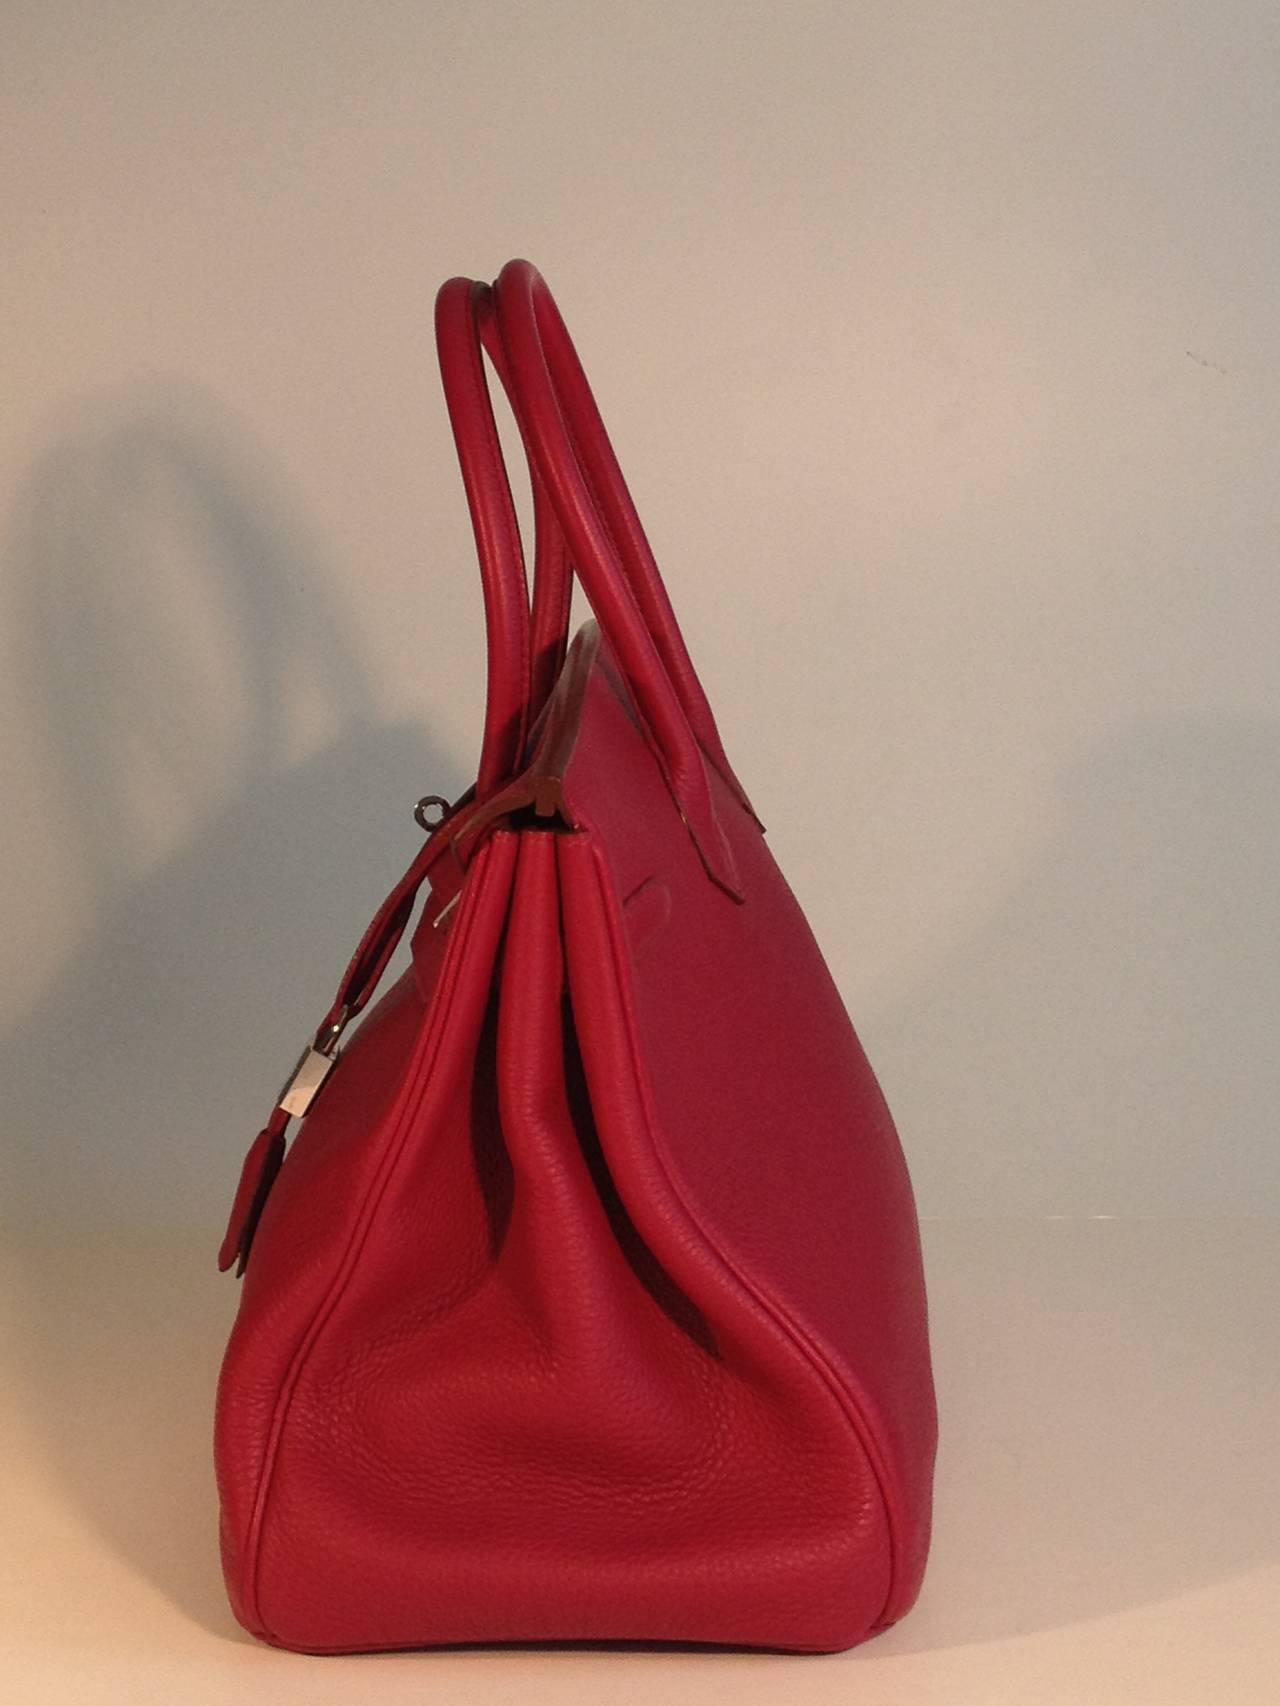 Gorgeous pebbled Clemence leather is absolutely perfect in this fabulous taspberry red color. The Birkin is one of the most prominent symbols of elegance and luxury, and the substantial and spacious 35cm size in a deep and bold color like this is